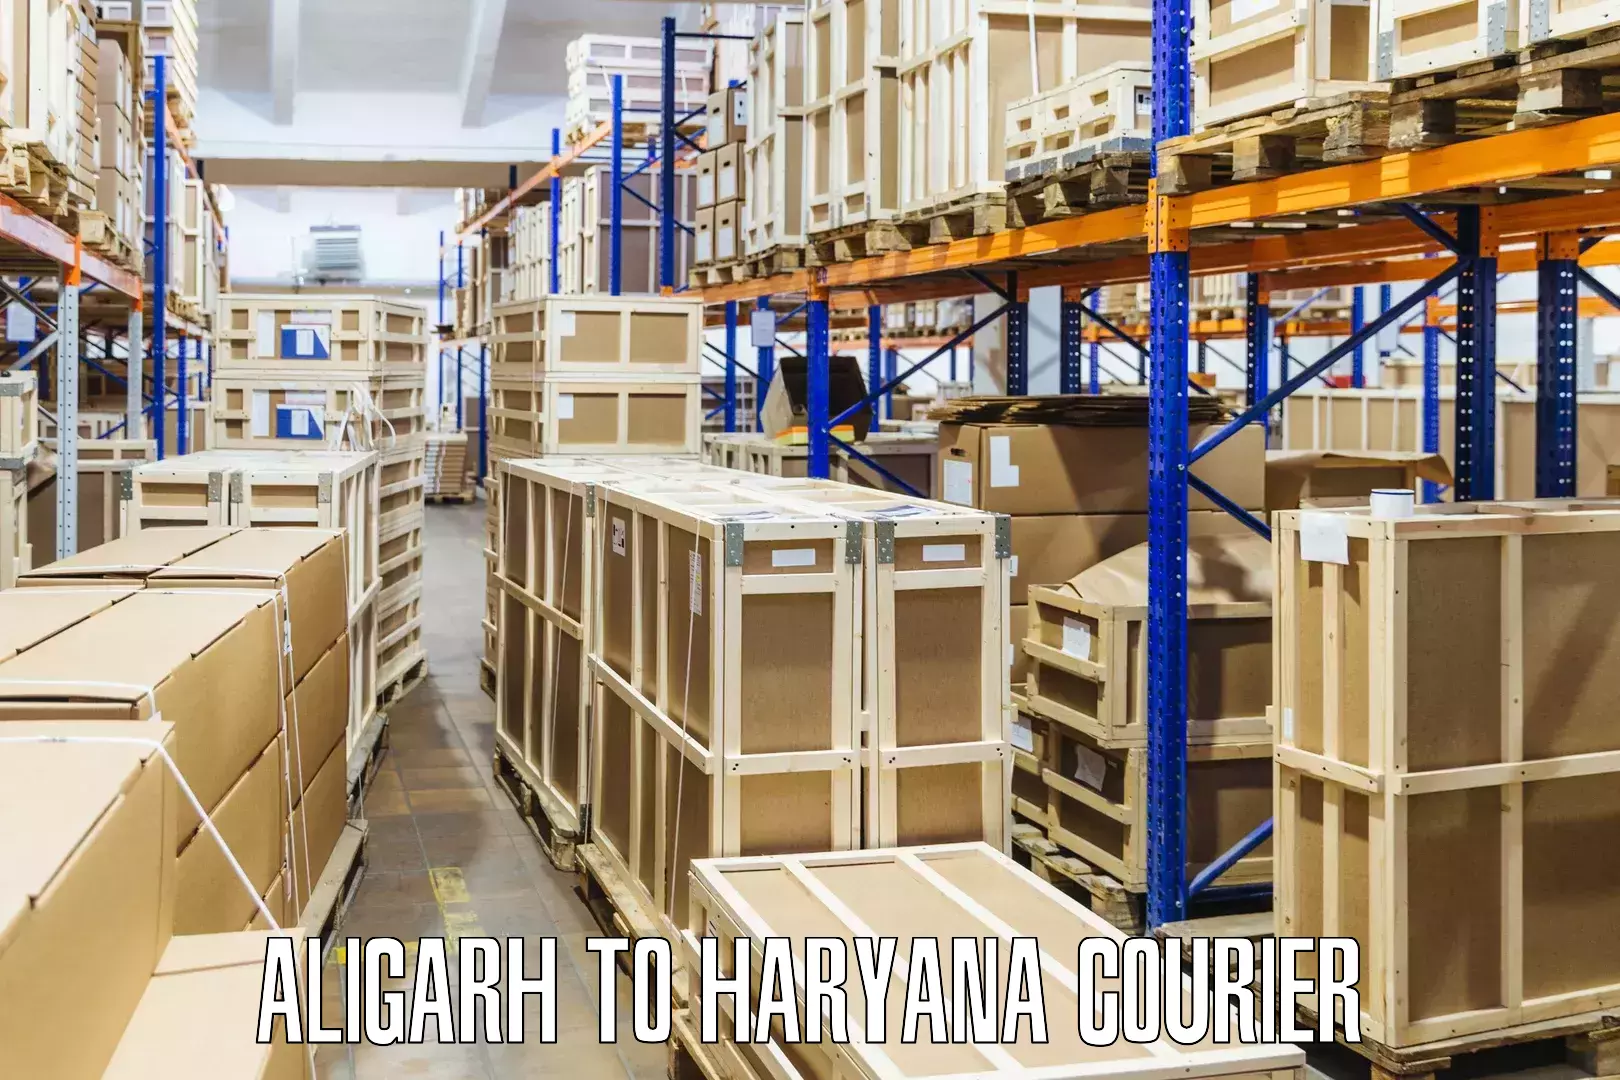 Global courier networks Aligarh to Agroha